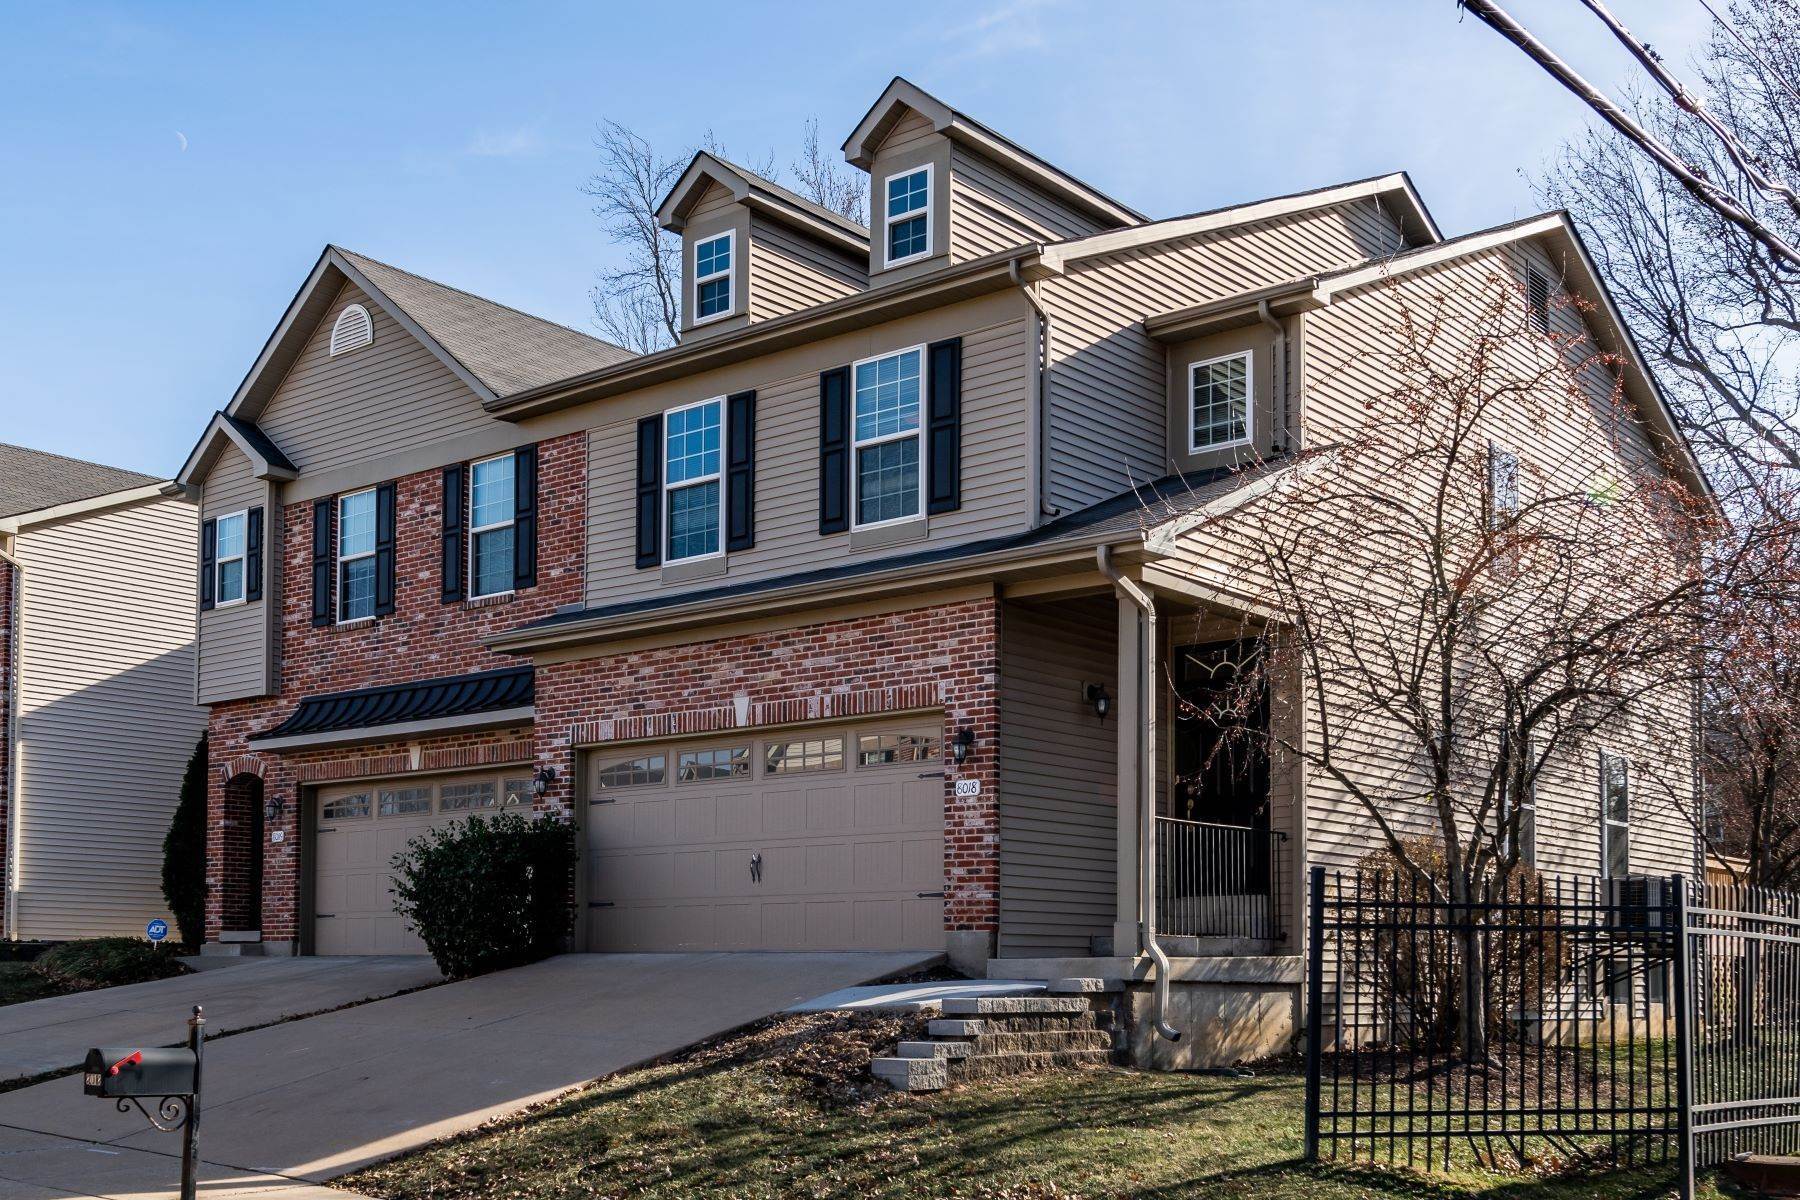 Property for Sale at Carefree Living in Fabulous Townhome 8018 #B Presidio Court University City, Missouri 63130 United States